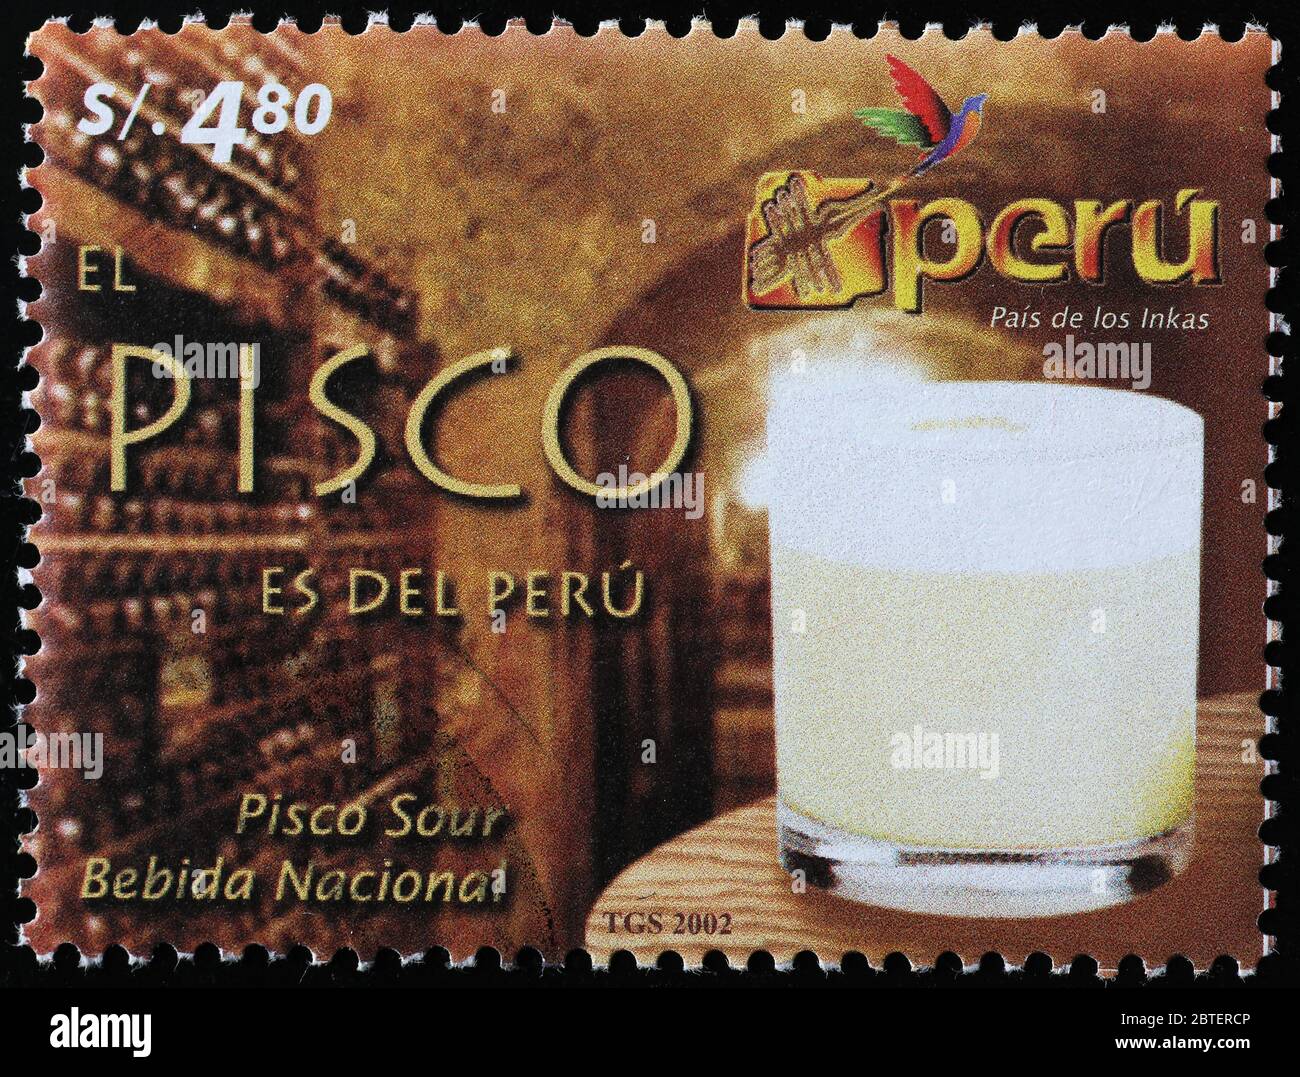 Pisco sour, peruvian national drink on postage stamp Stock Photo